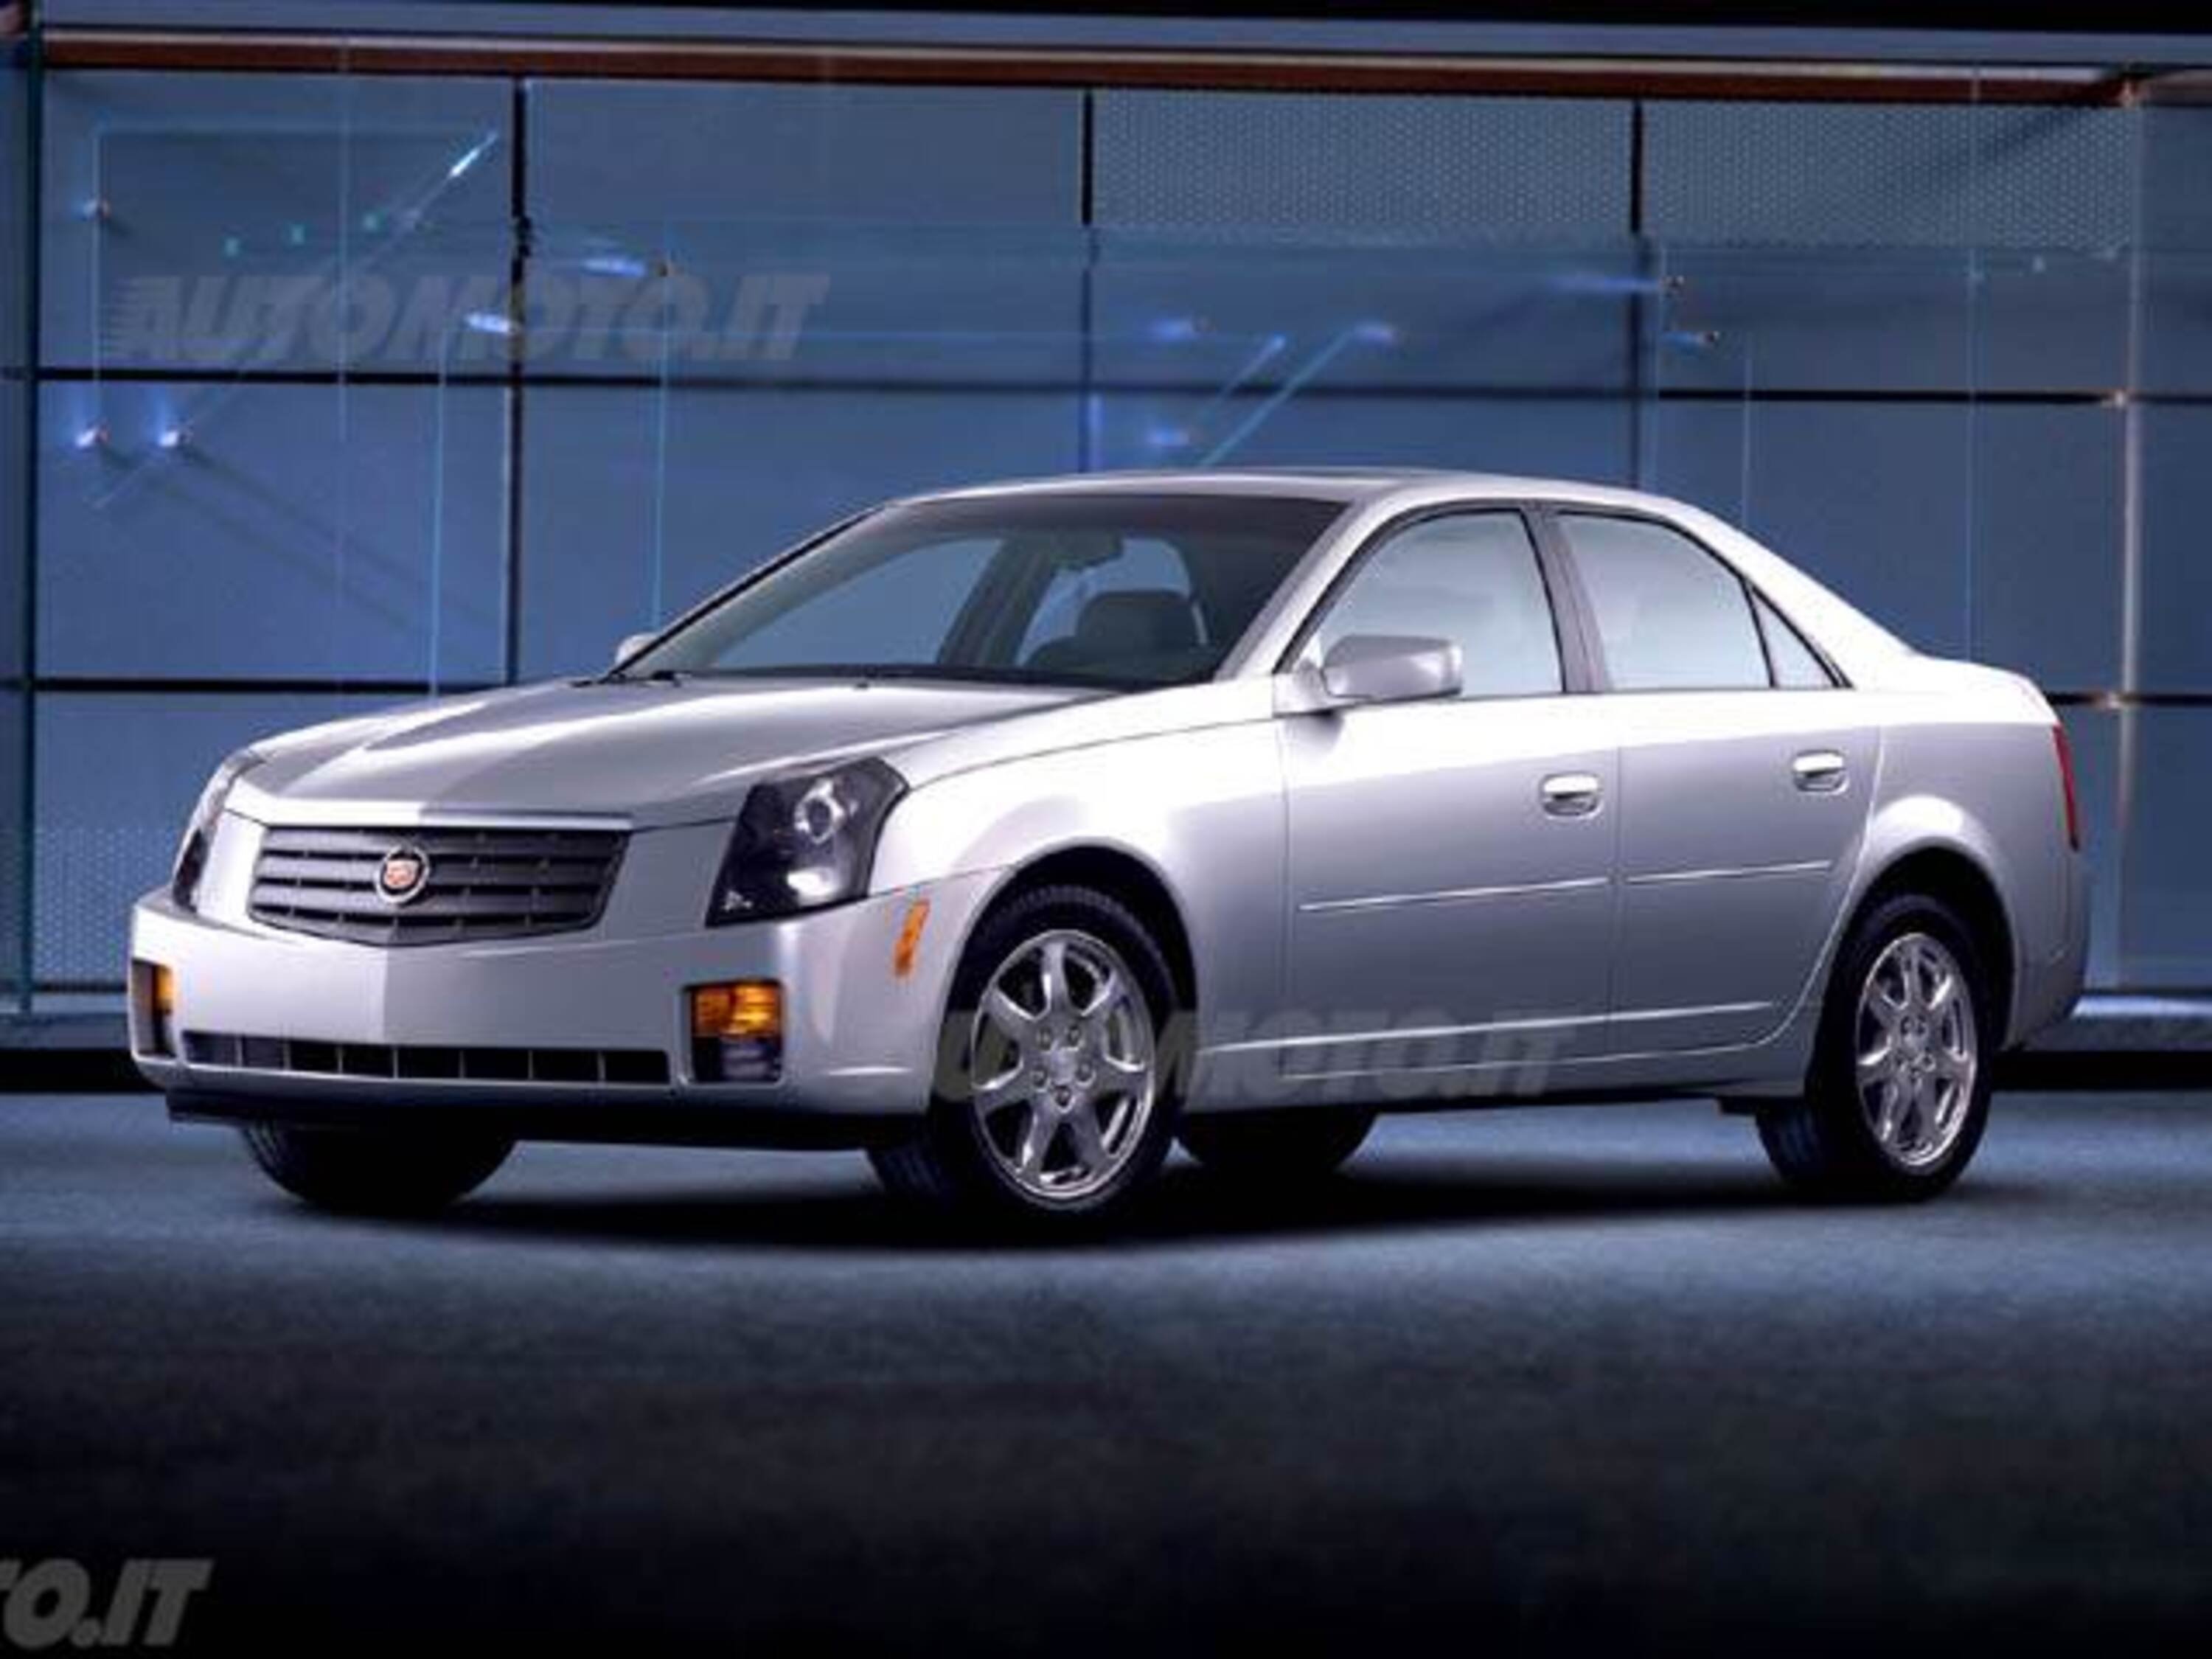 Cadillac CTS 2.8 V6 Business Edition Sport Luxury